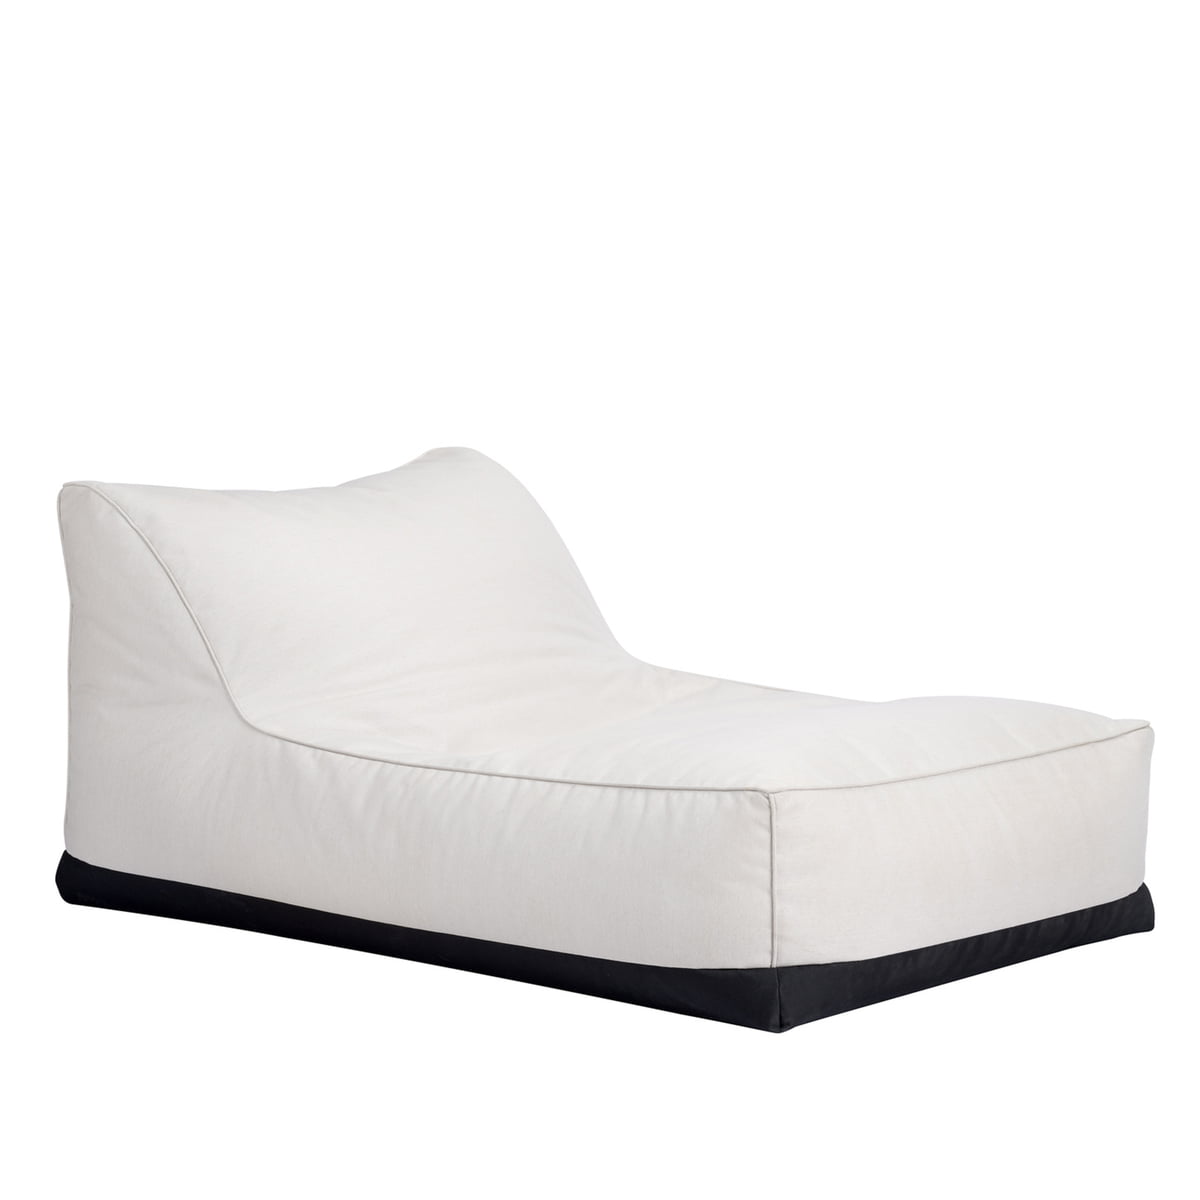 NORR11 - Storm Outdoor Lounge Chair